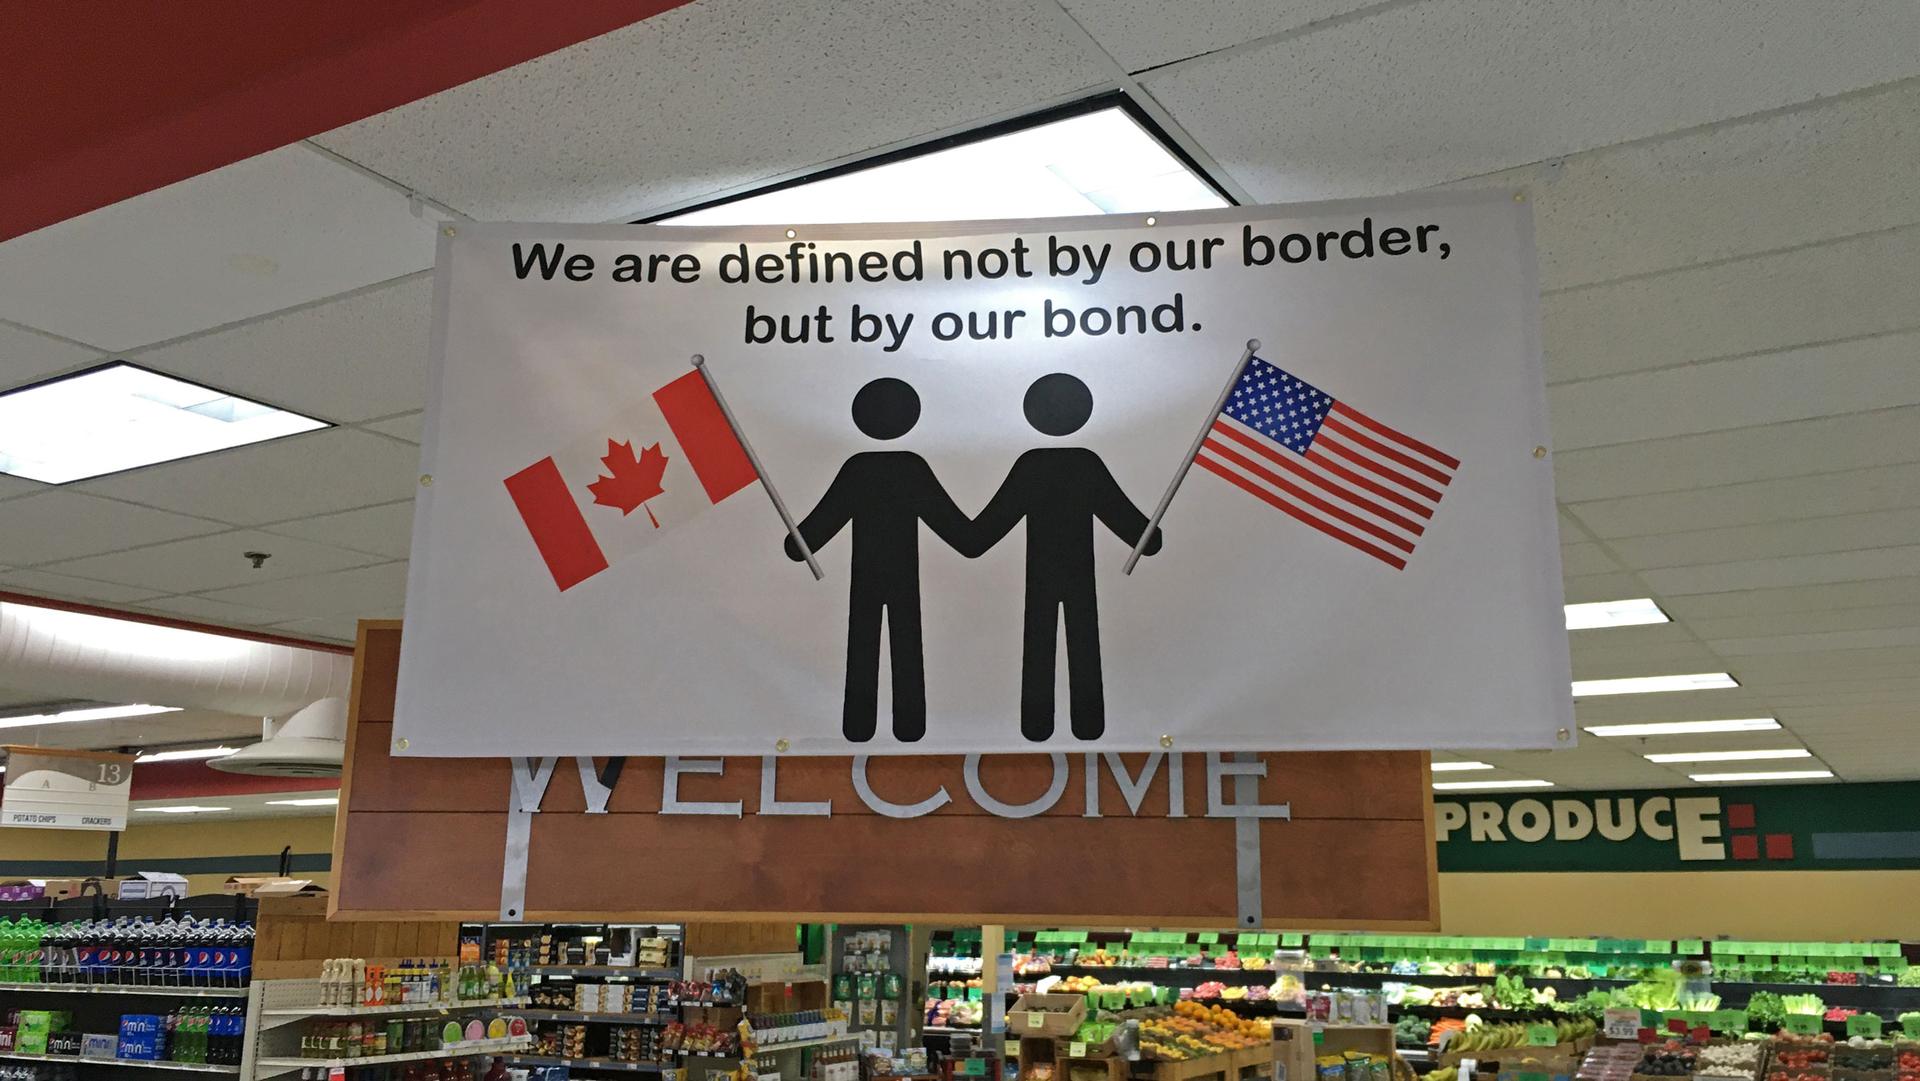 Several businesses in Point Roberts display this sign of solidarity, seen here inside Point Roberts International Marketplace.